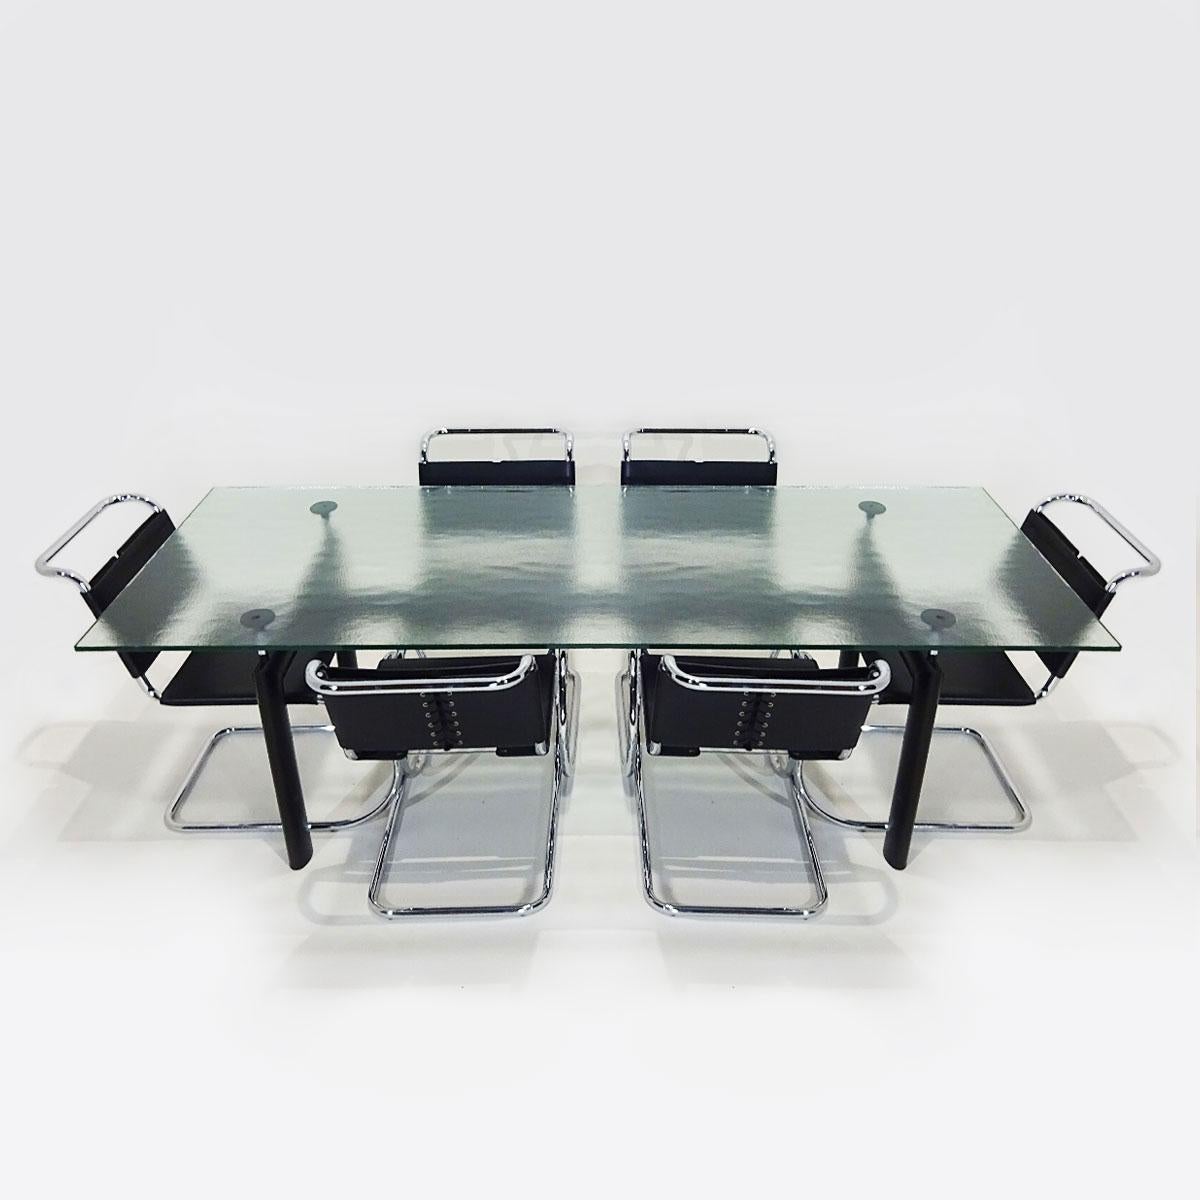 Vintage iconic dining set featuring a Le Corbusier textured glass Cassina LC6 table matched to 6 chrome and black leather Mies van der Rohe MR10 dining chairs by Knoll.

Designed within the same period in the late 1920s this iconic set is a